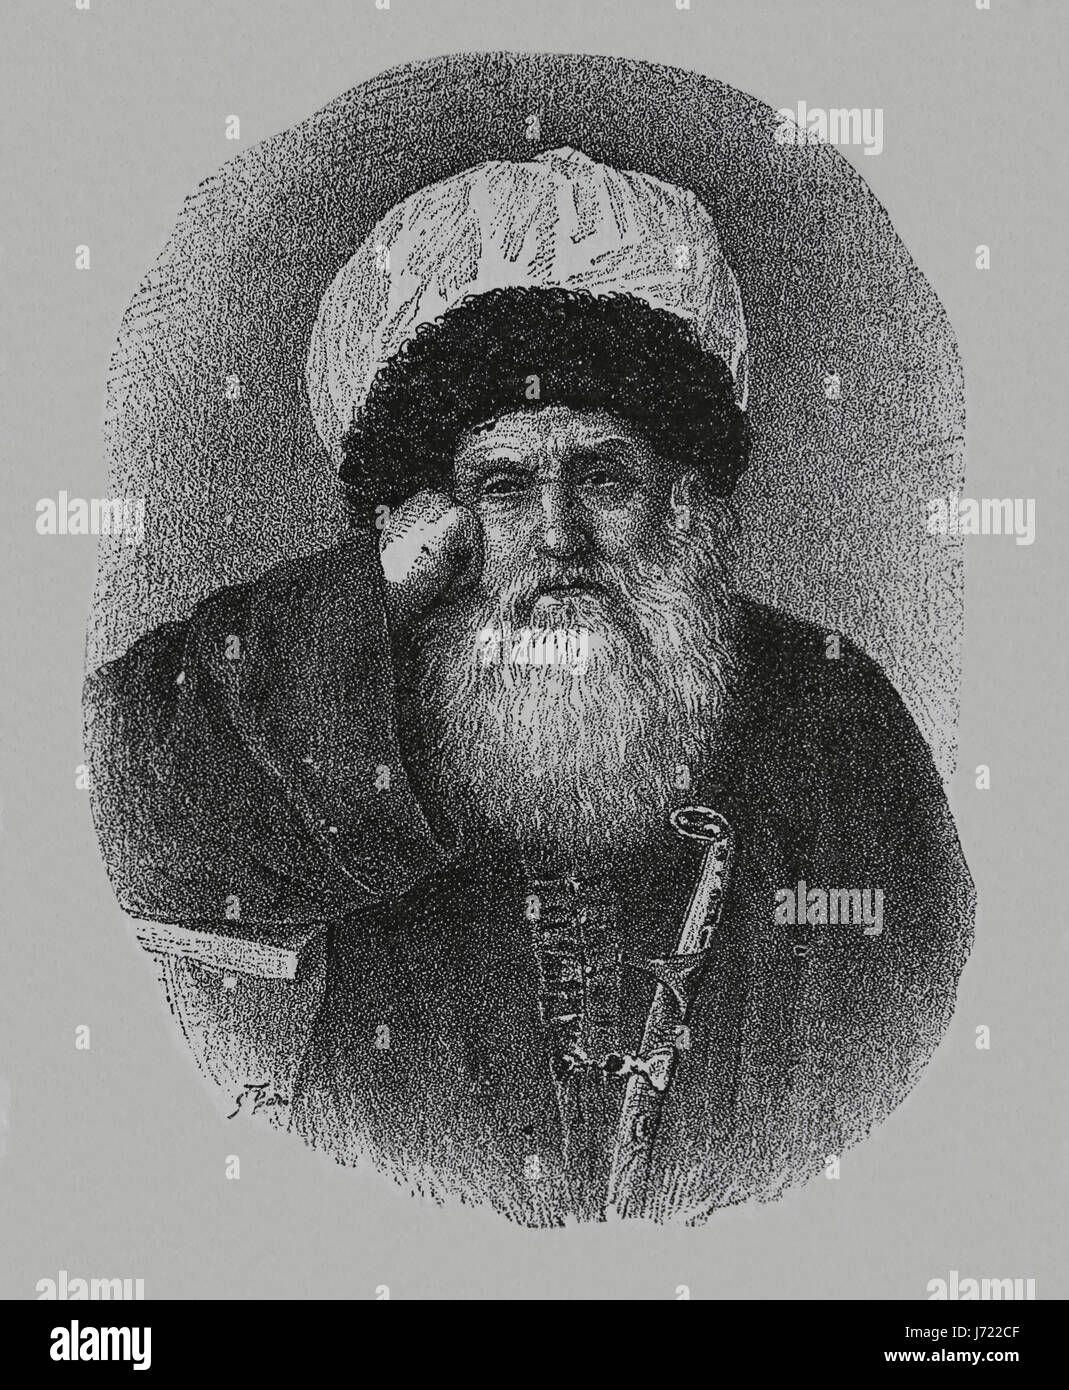 Iman Shamil (1797-1871). Leader anti-Russian reistance in Caucasian War. 3rd Imam of Caucasian Imamate. Engraving. Our Century, 1883. Spanish Edition. Stock Photo